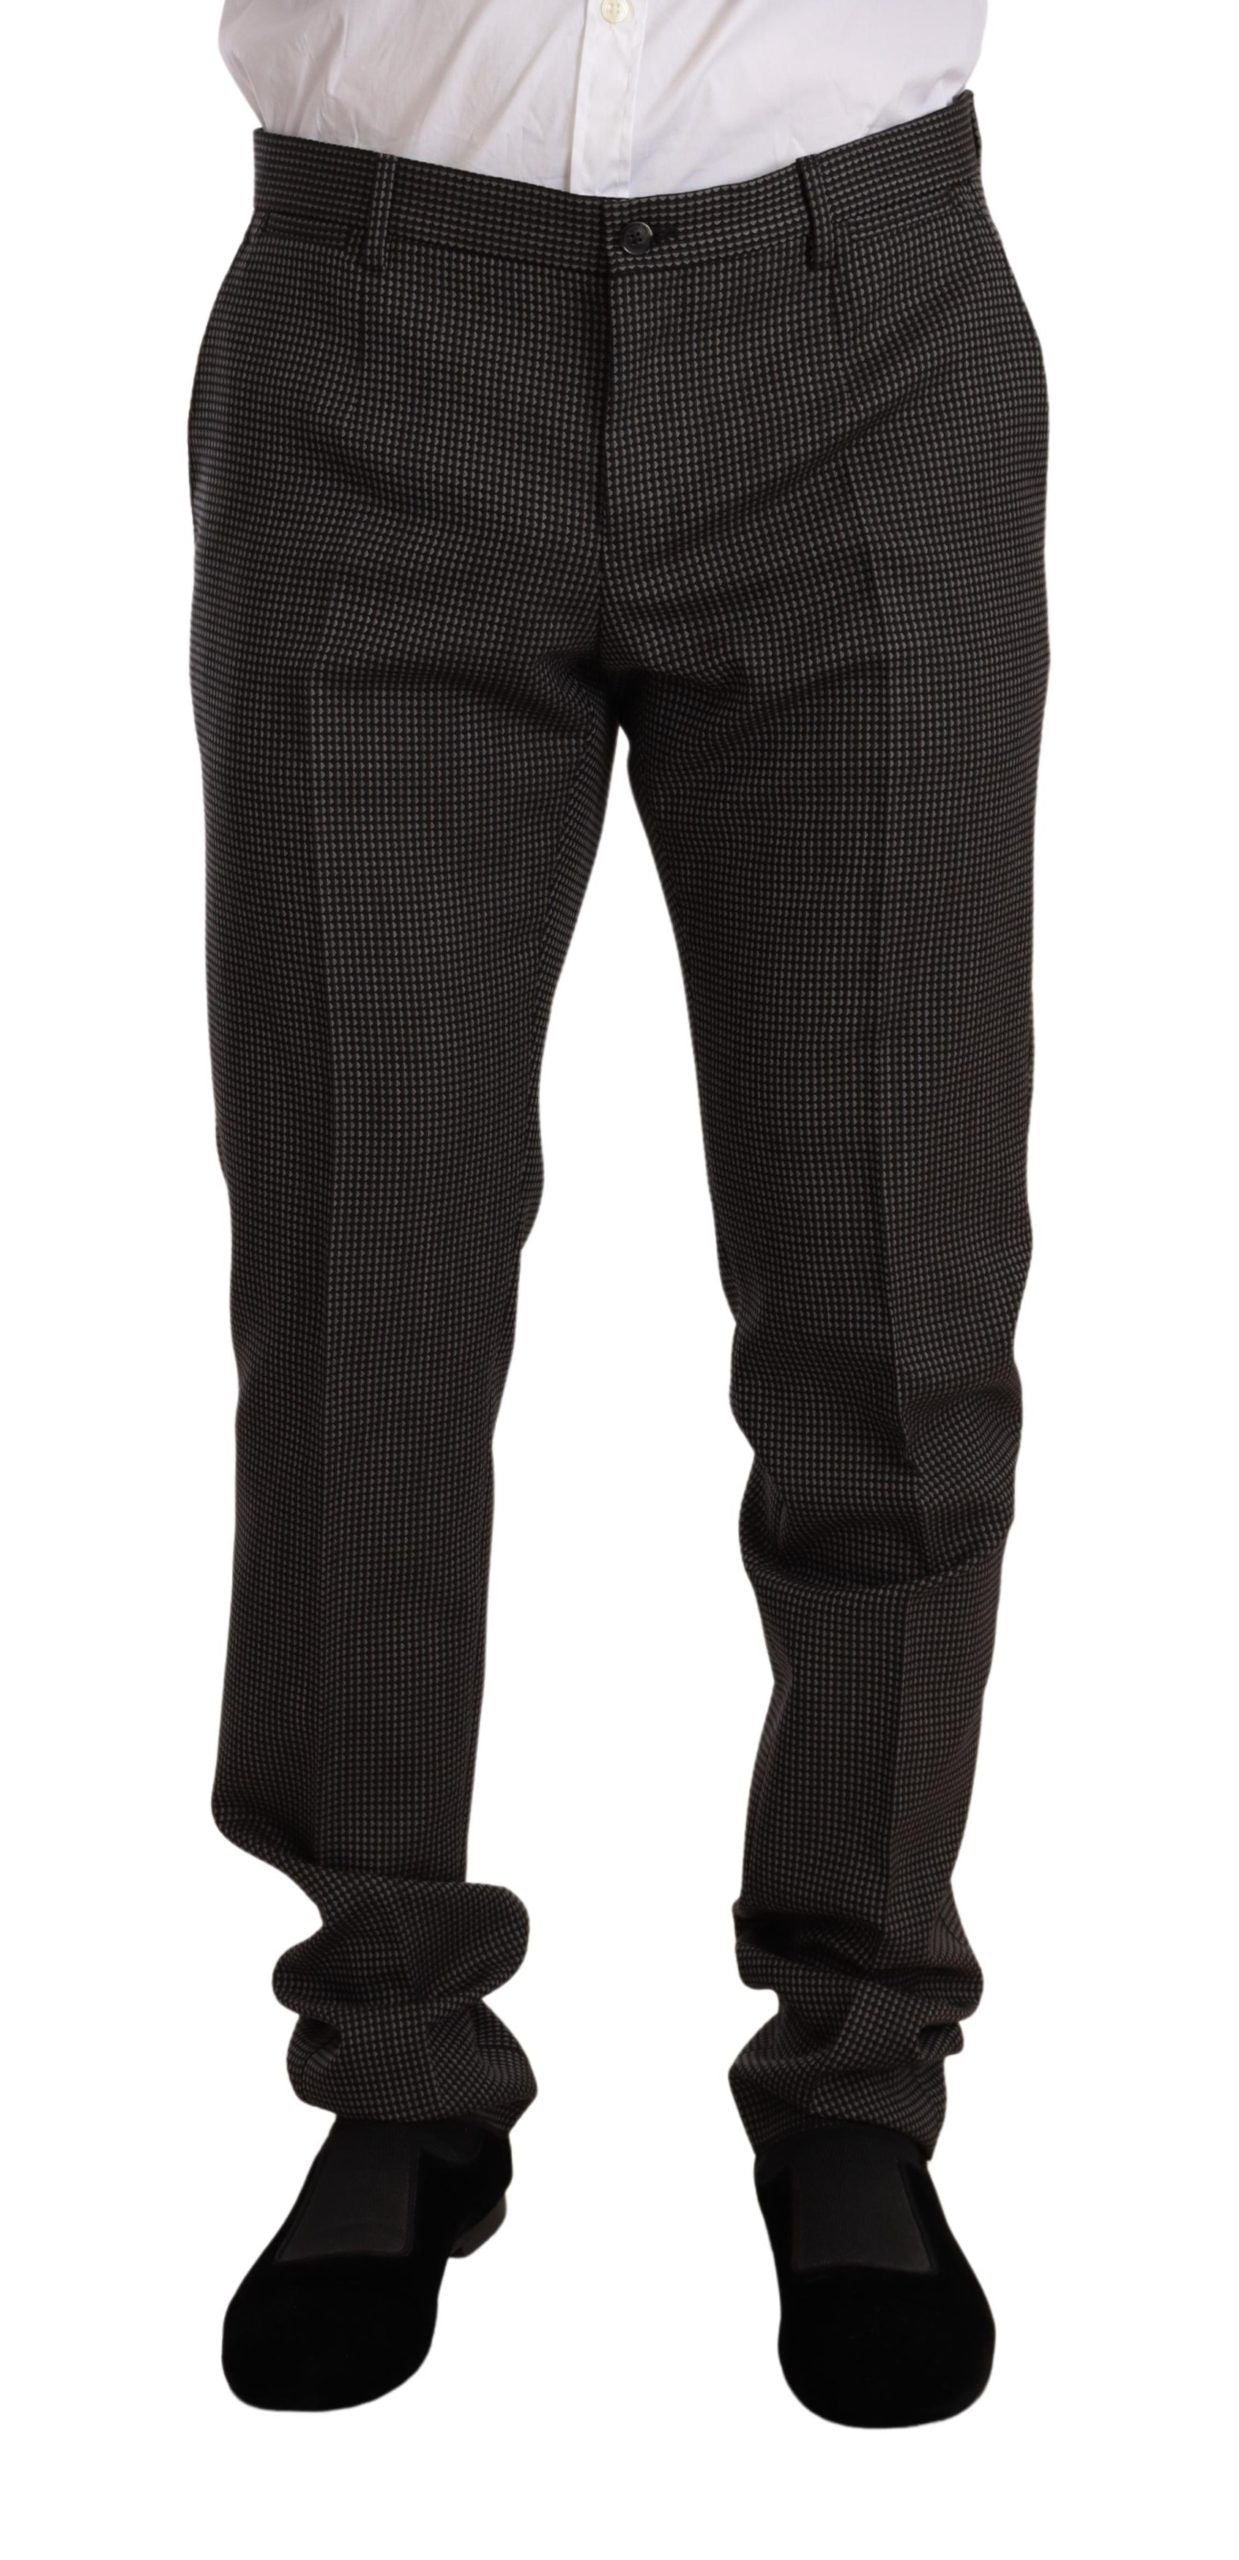 Dolce & Gabbana Men's Black Fantasy Pattern Wool MARTINI Suit - Designed by Dolce & Gabbana Available to Buy at a Discounted Price on Moon Behind The Hill Online Designer Discount Store